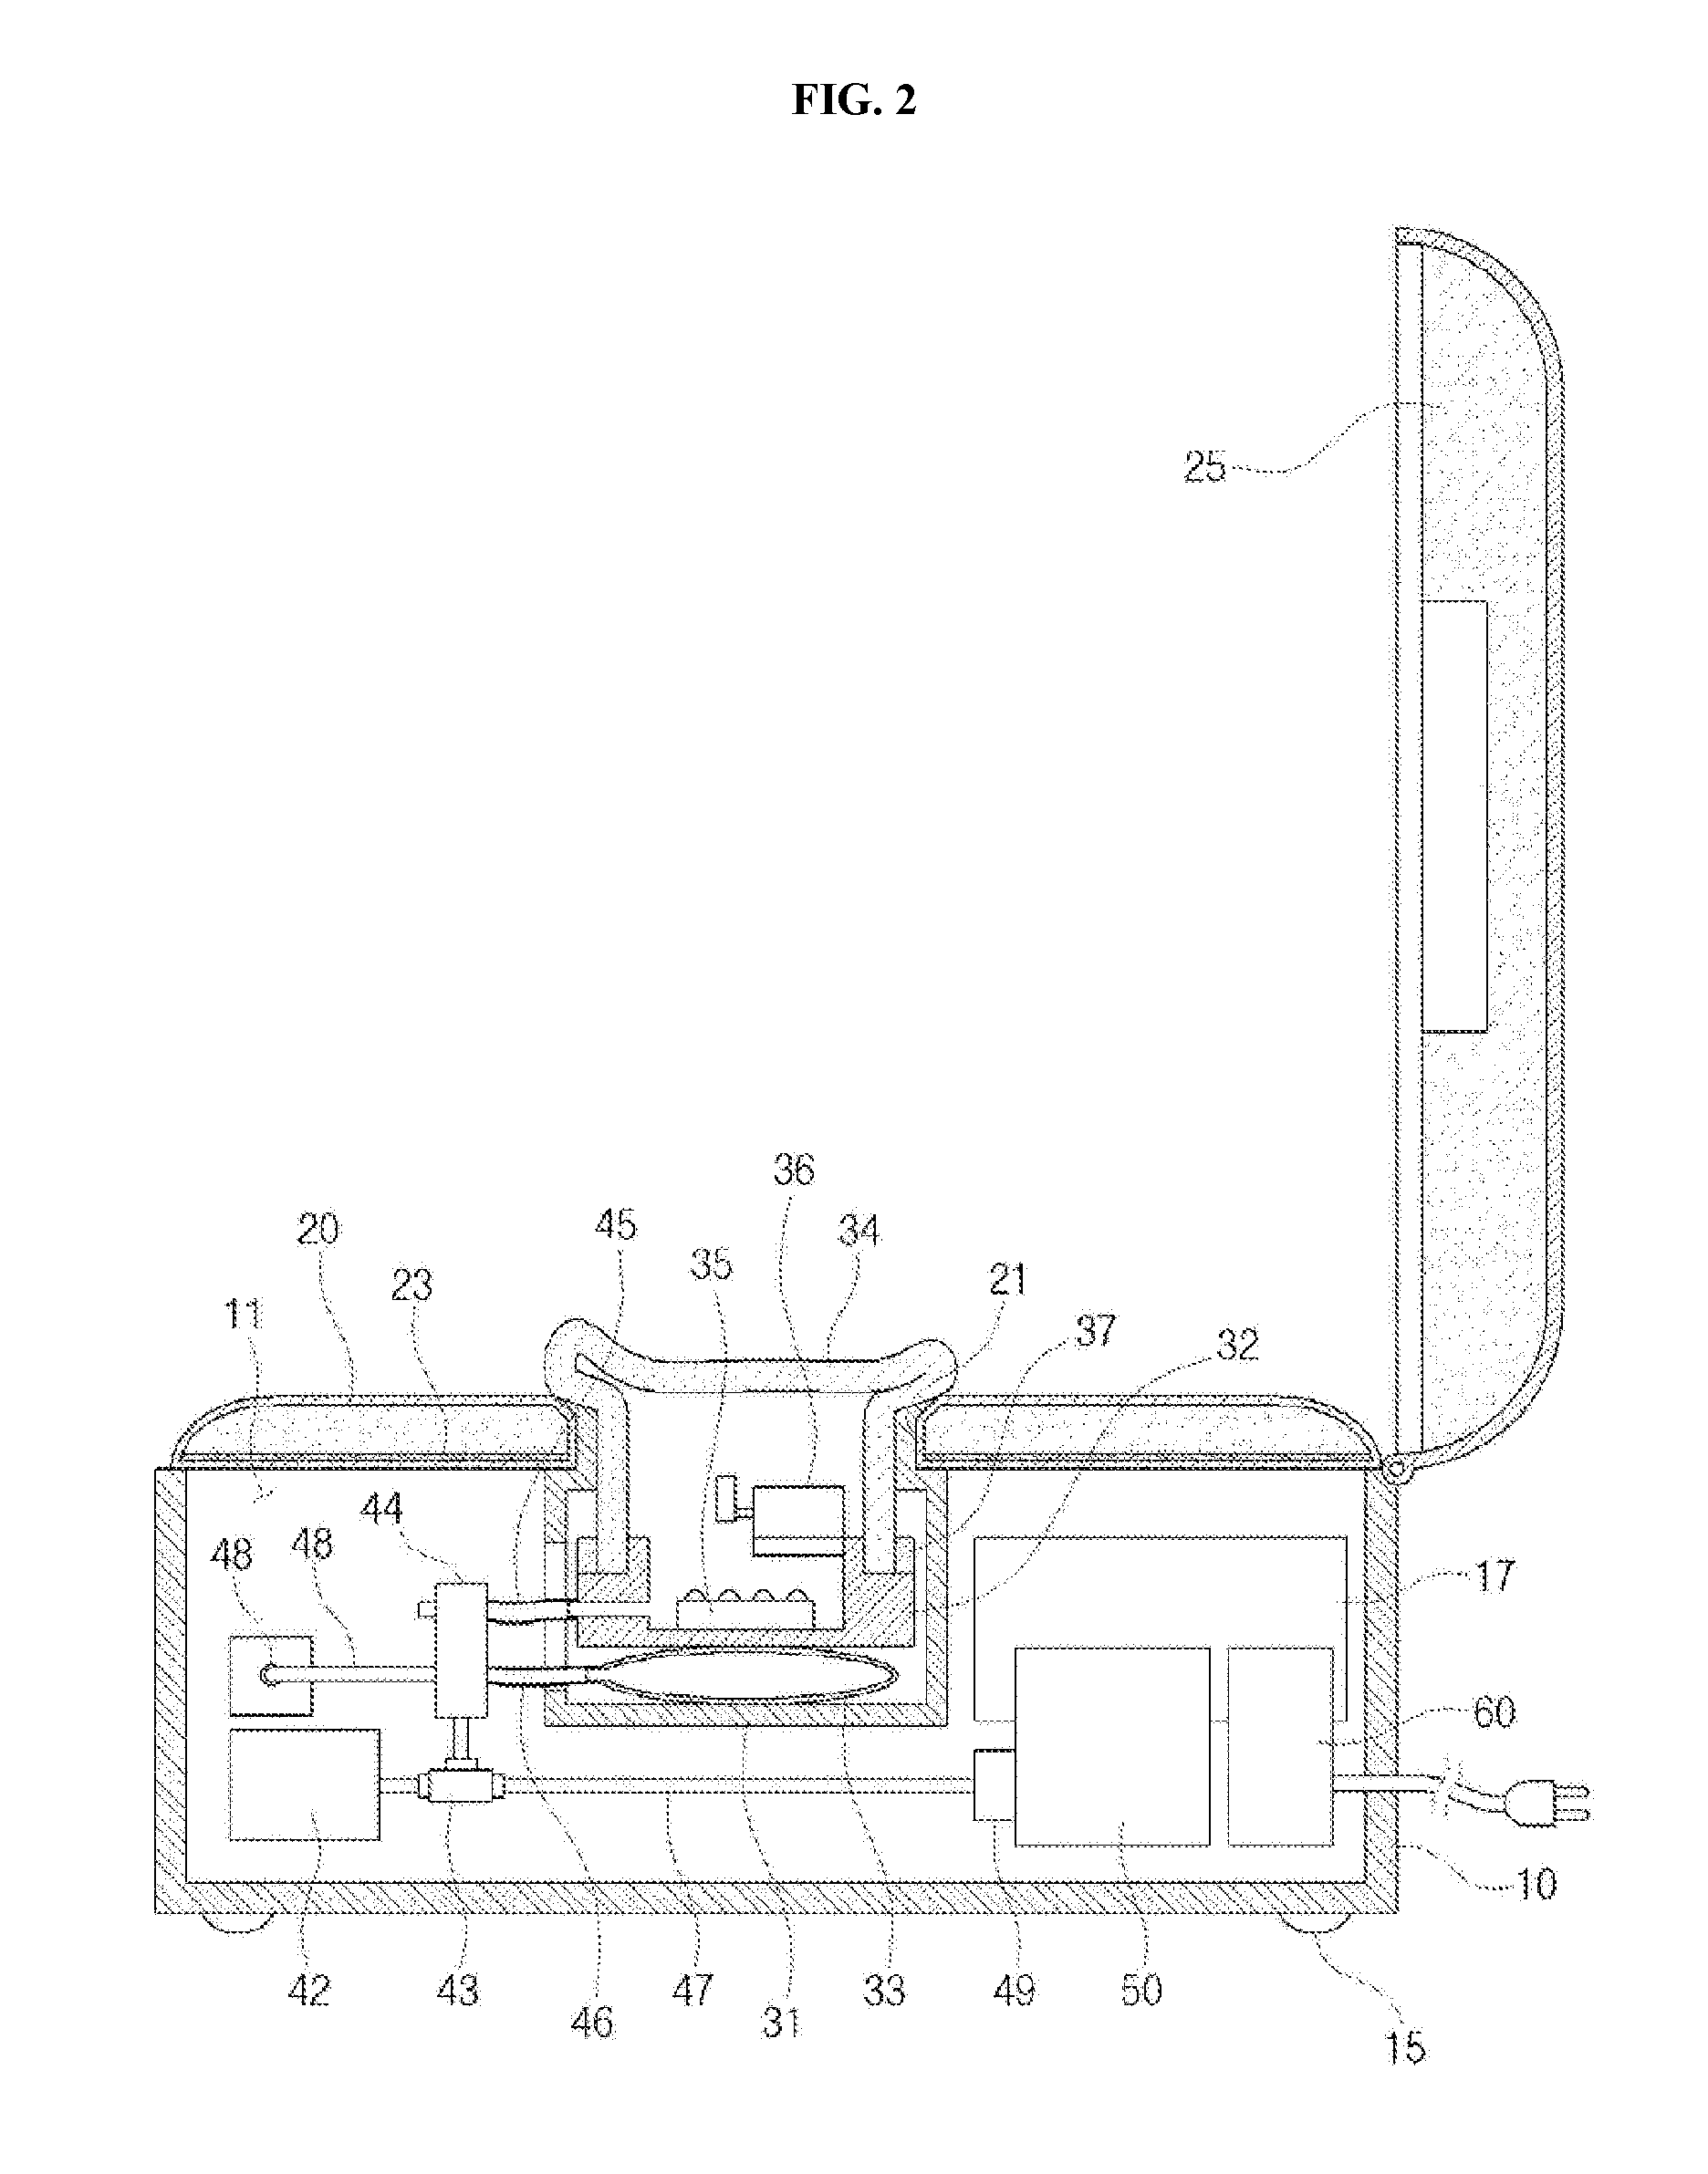 Seating apparatus for diagnosis and treatment of diagnosing and curing urinary incontinence, erectile dysfunction and defecation disorders